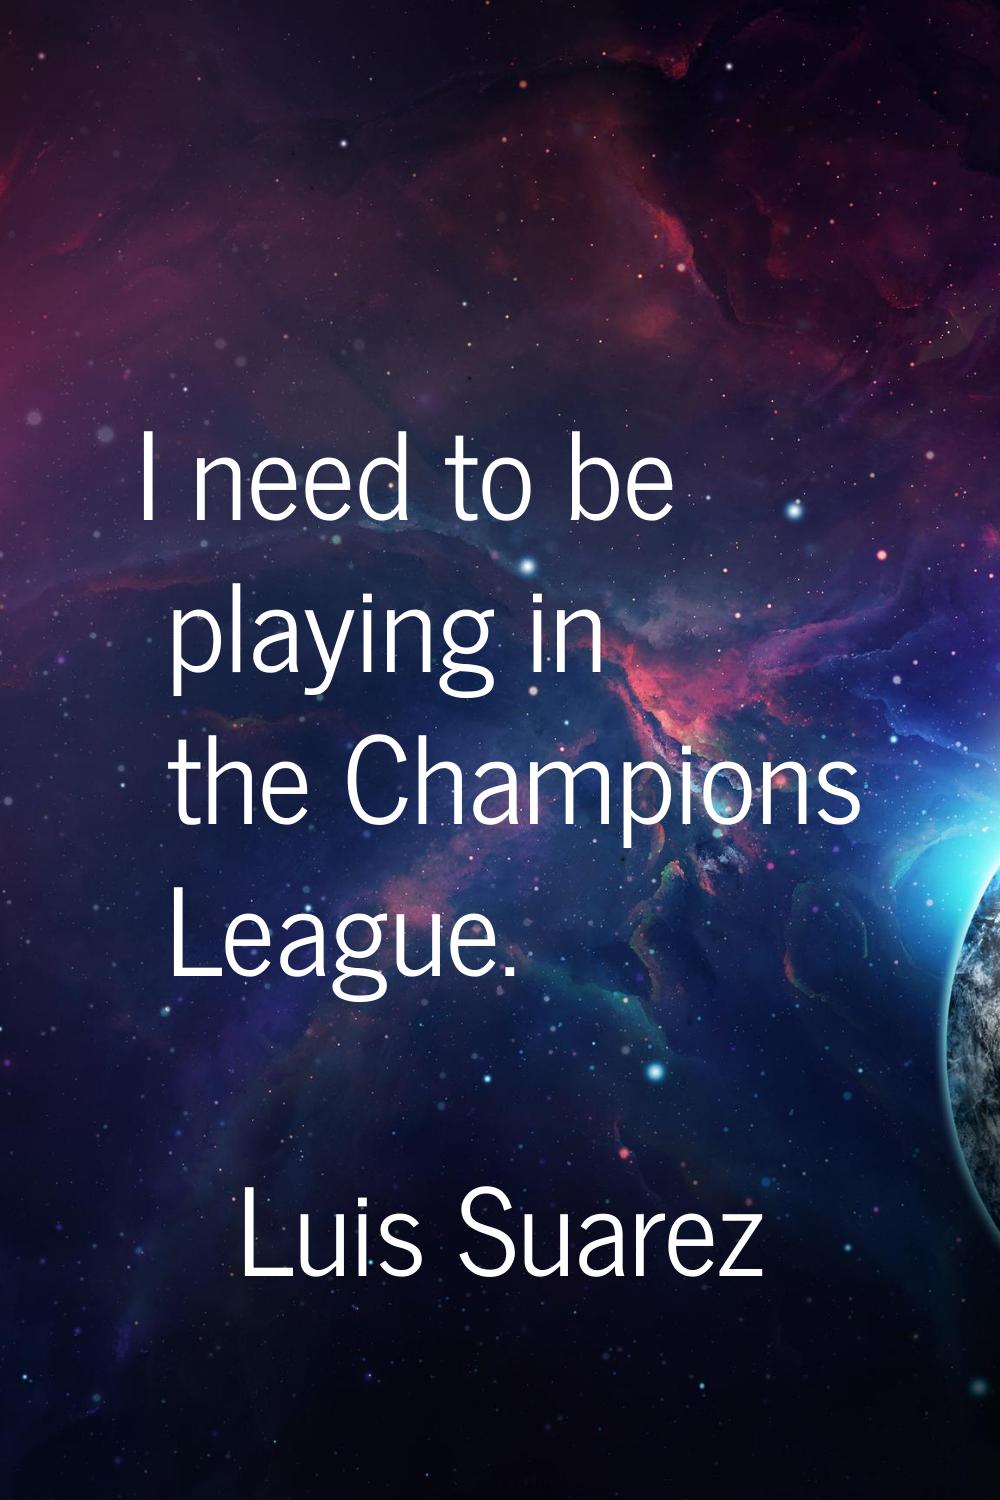 I need to be playing in the Champions League.